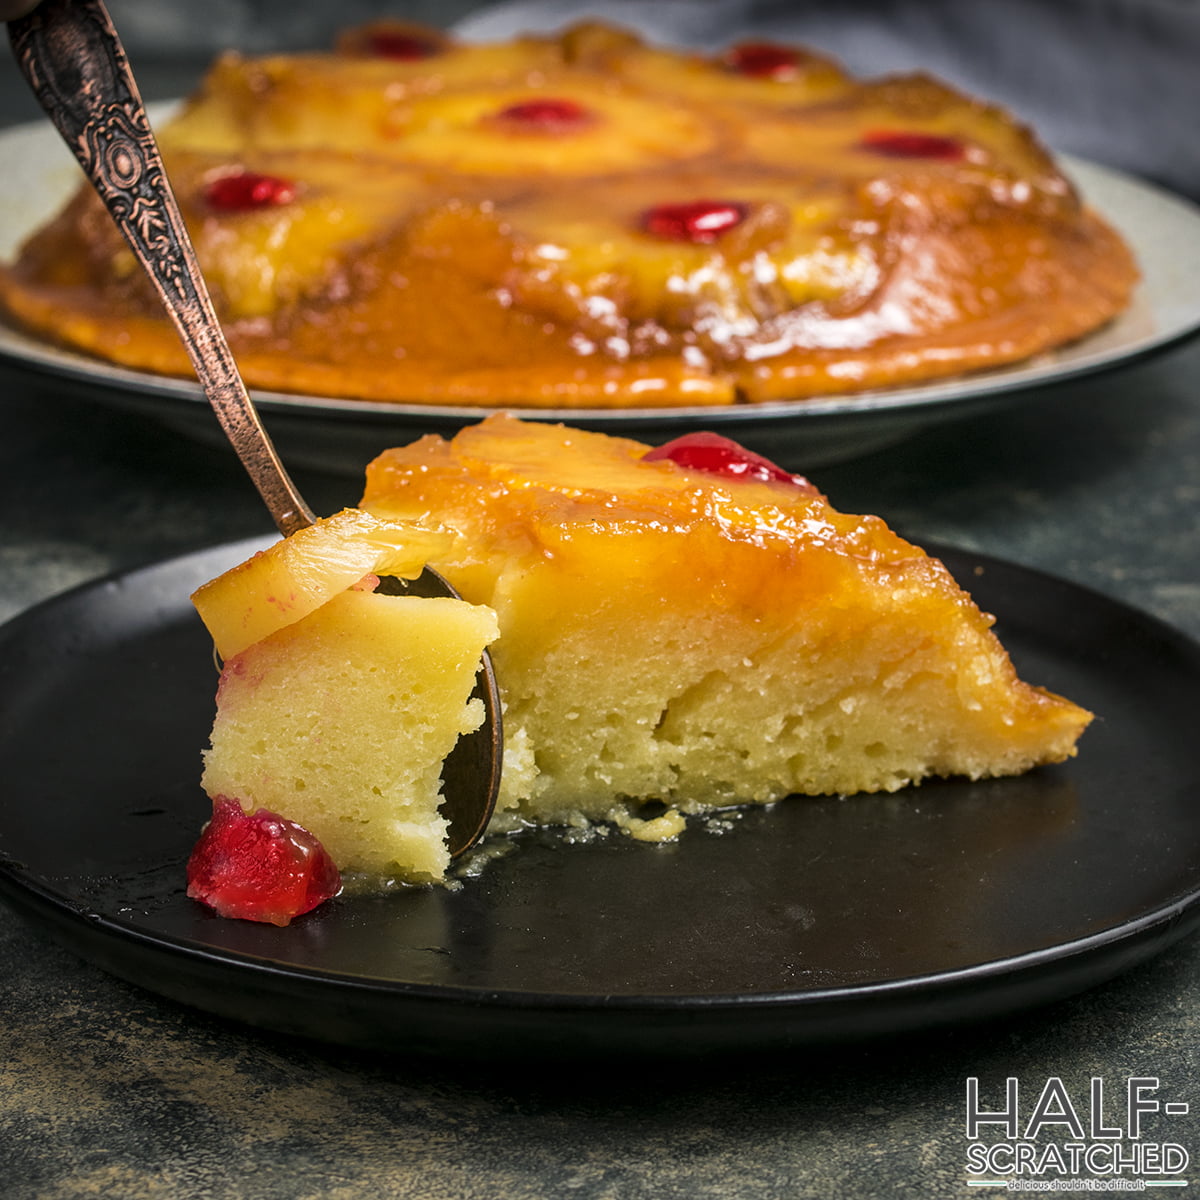 A spoon cutting a portion of pineapple upside down cake
